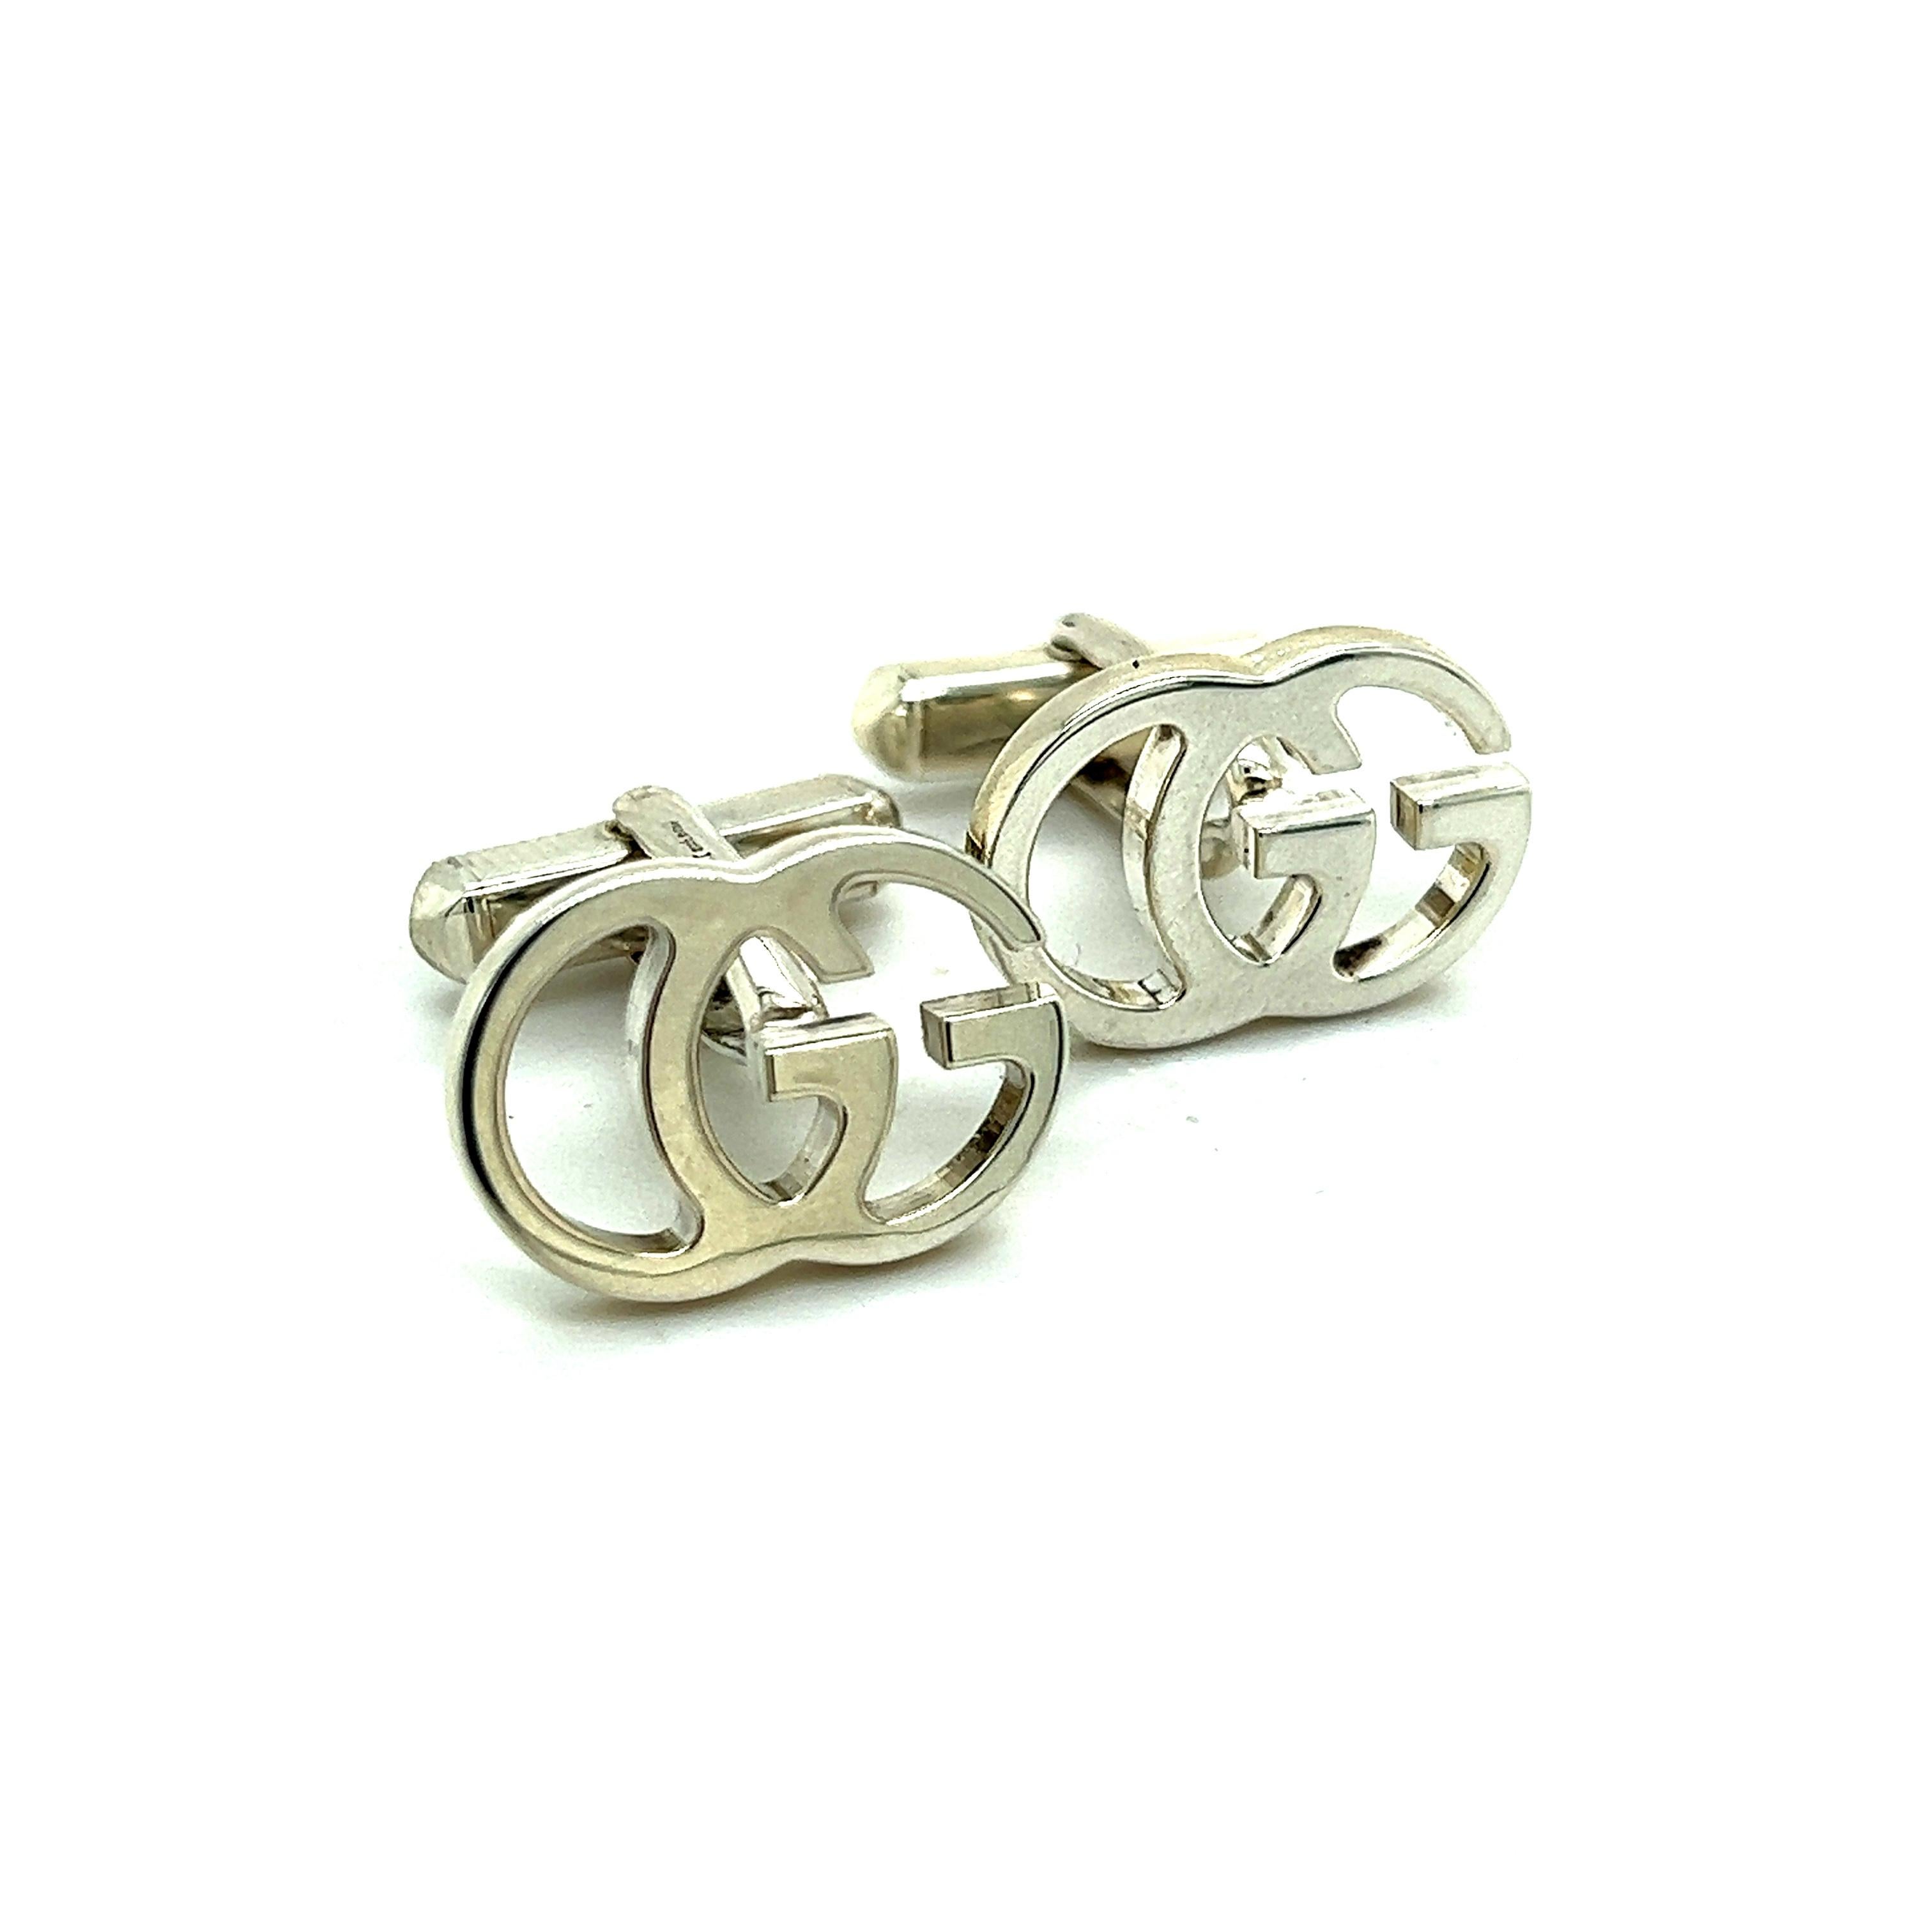 Authentic Gucci Estate Mens GG Cufflinks Silver G17

These elegant Authentic Gucci cufflinks are made of sterling silver and have a weight of 12 grams.

TRUSTED SELLER SINCE 2002

PLEASE SEE OUR HUNDREDS OF POSITIVE FEEDBACKS FROM OUR